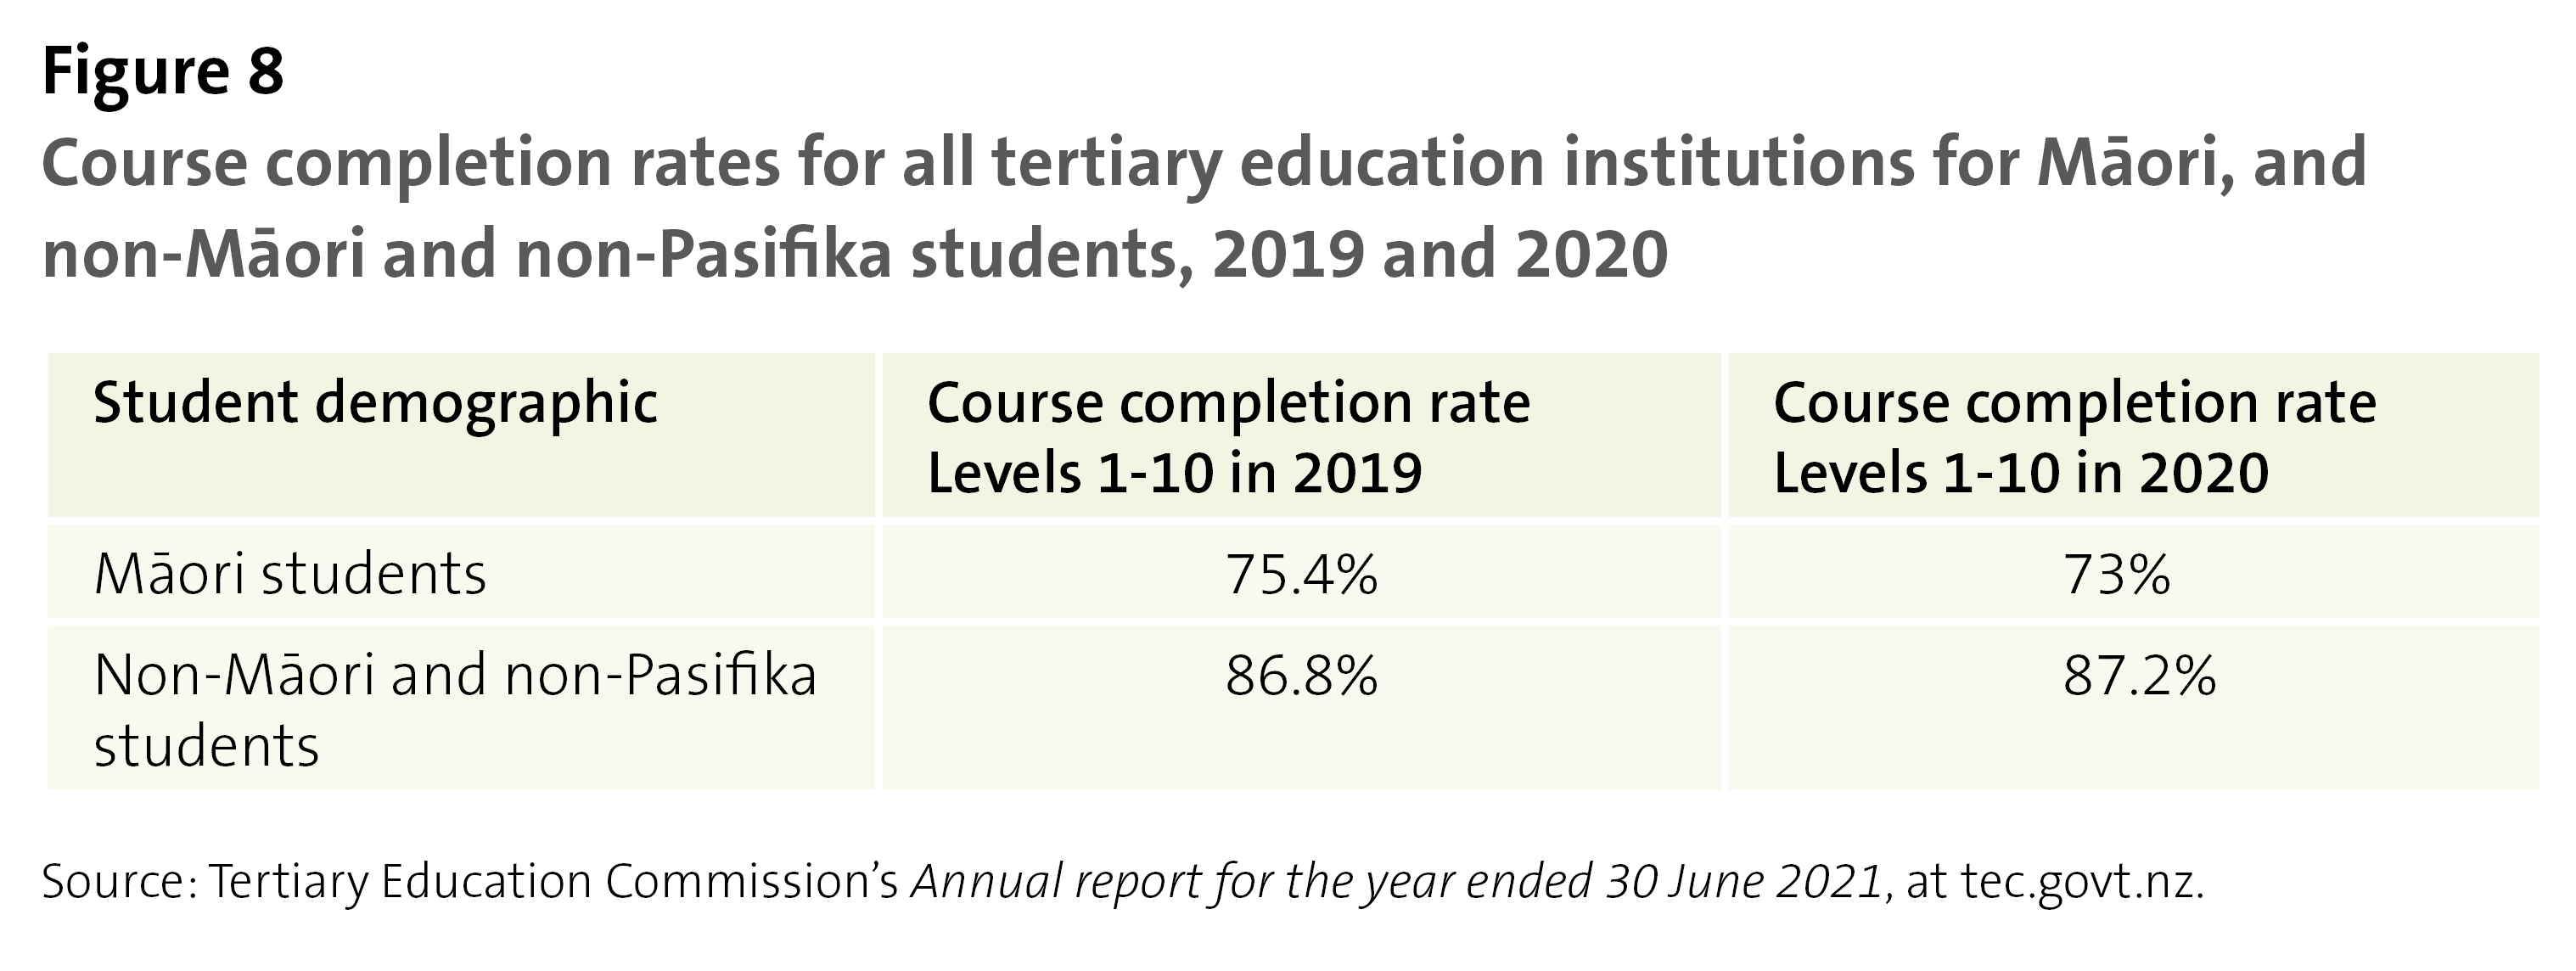 Figure 8: Course completion rates for all tertiary education institutions for Māori, and non-Māori and non-Pasifika students, 2019 and 2020